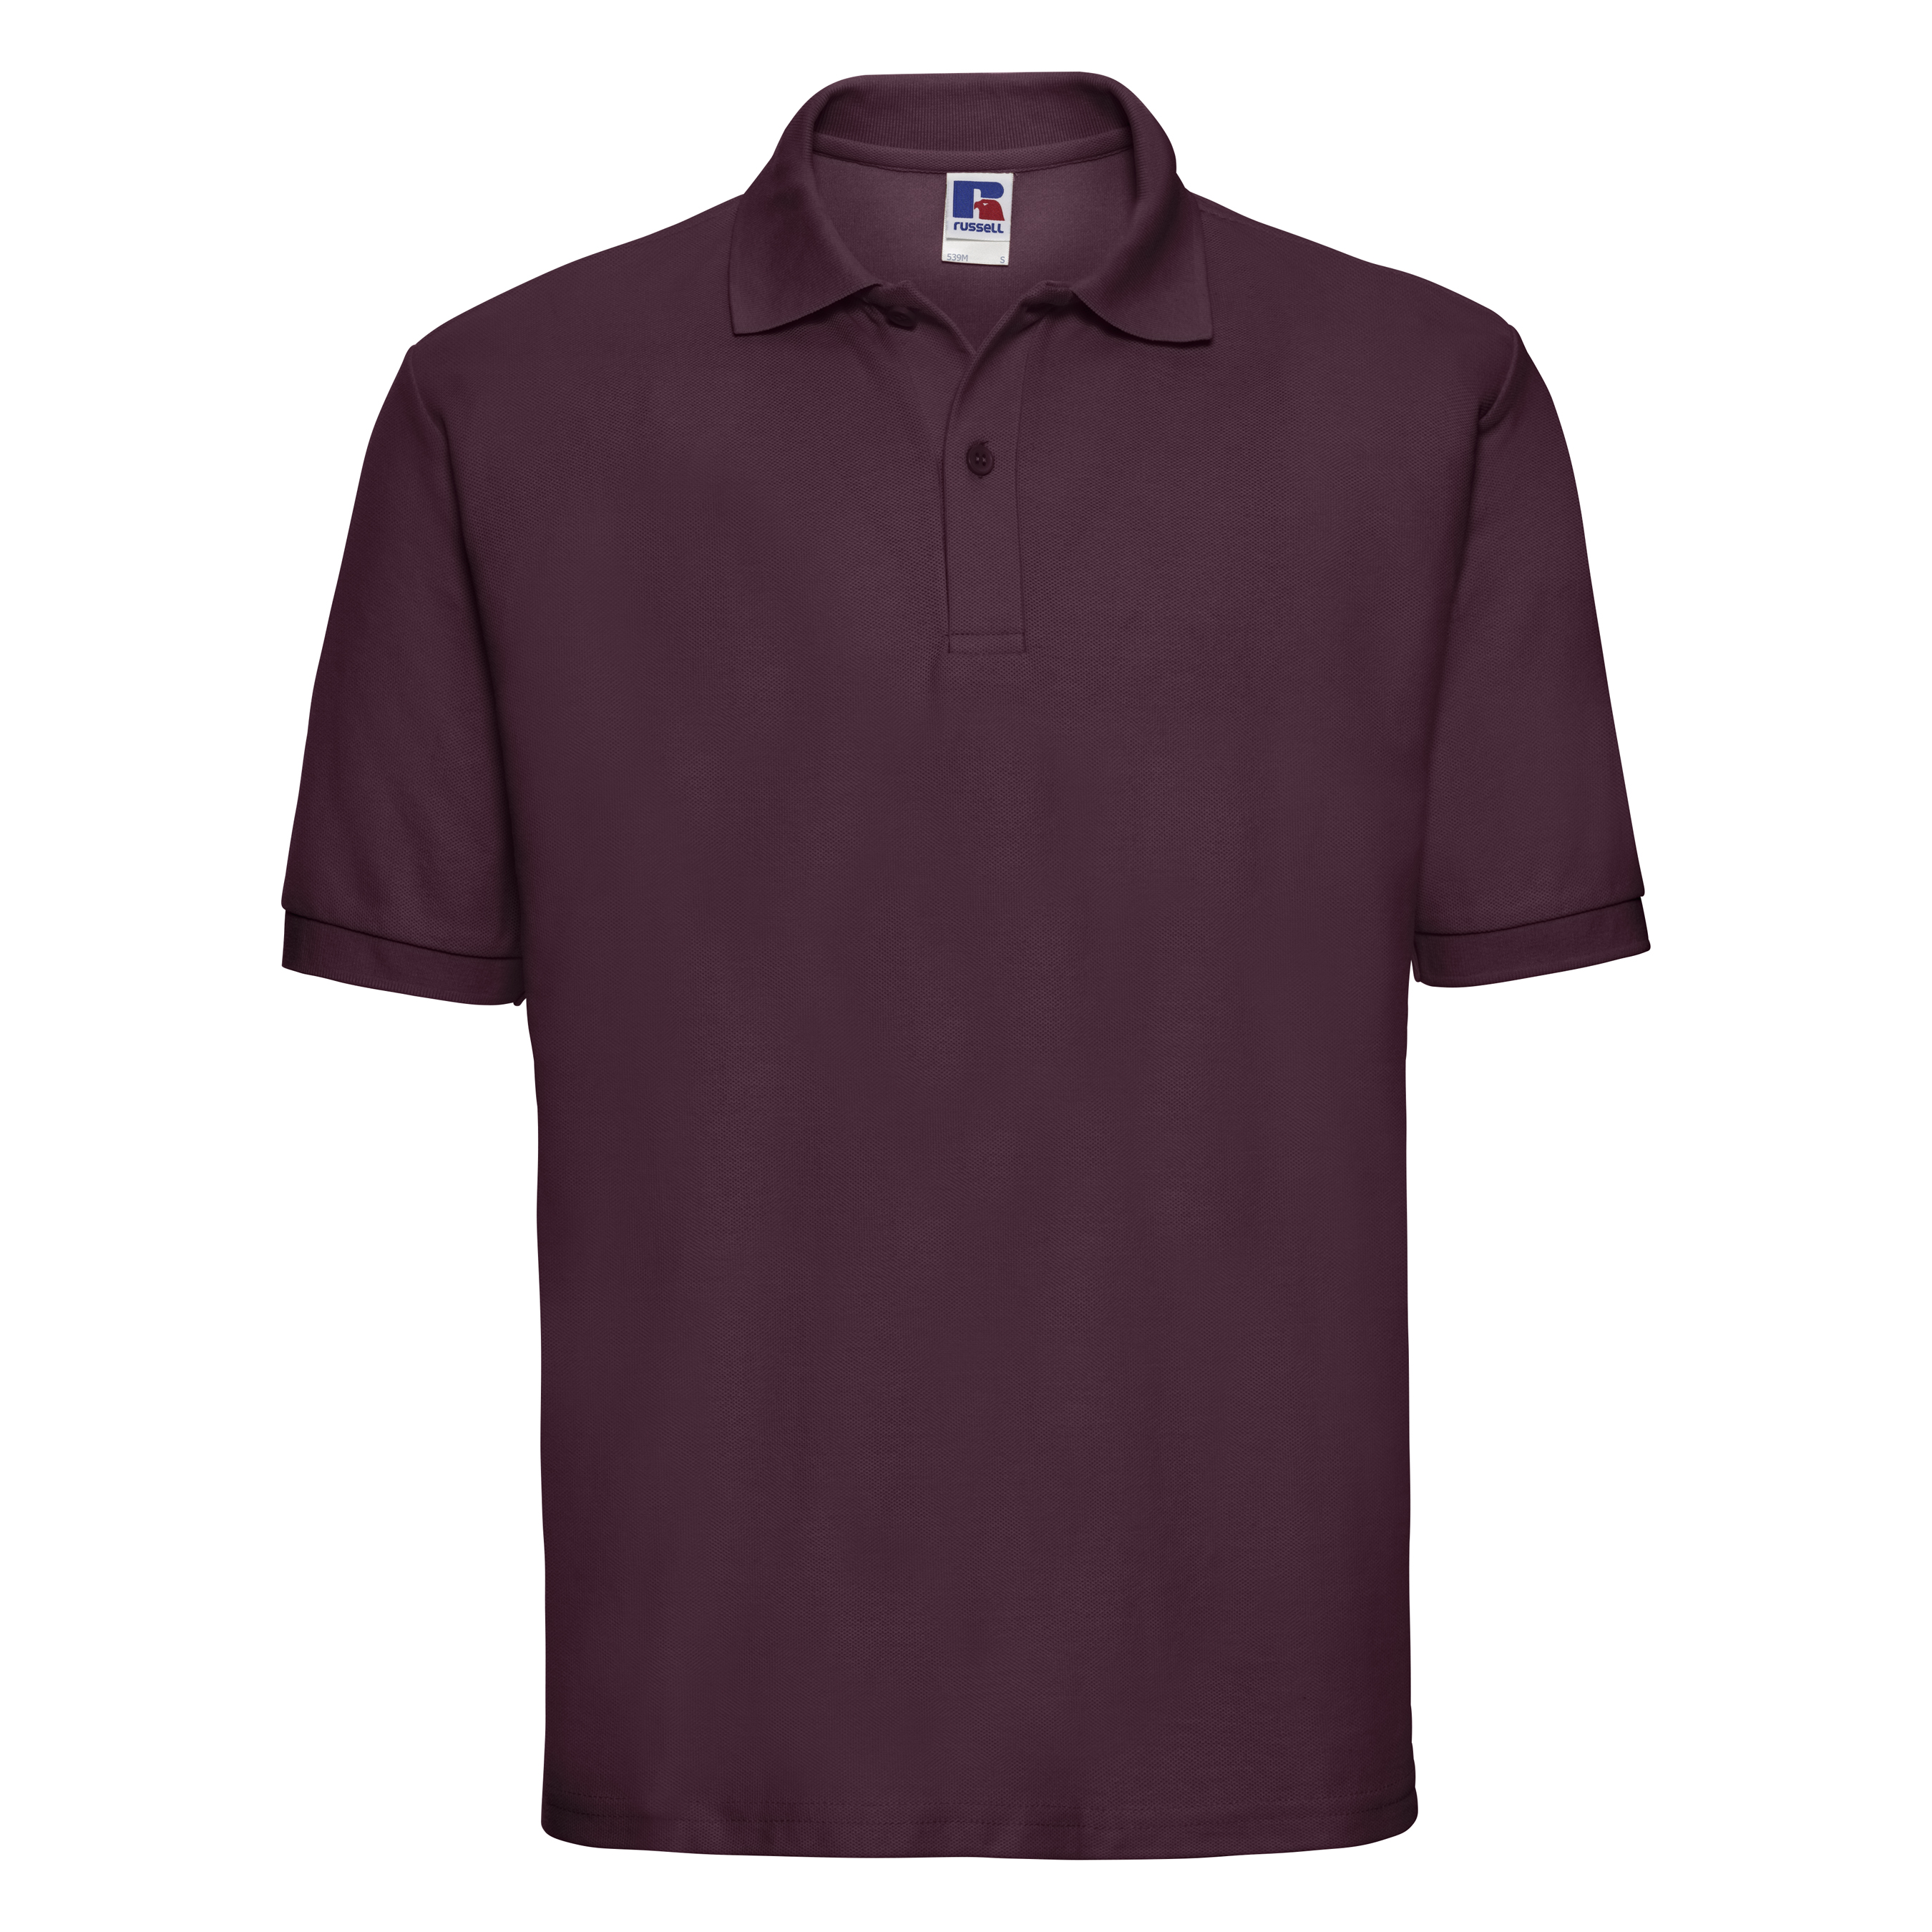 ax-httpswebsystems.s3.amazonaws.comtmp_for_downloadrussell-classic-polycotton-polo-burgundy.jpg